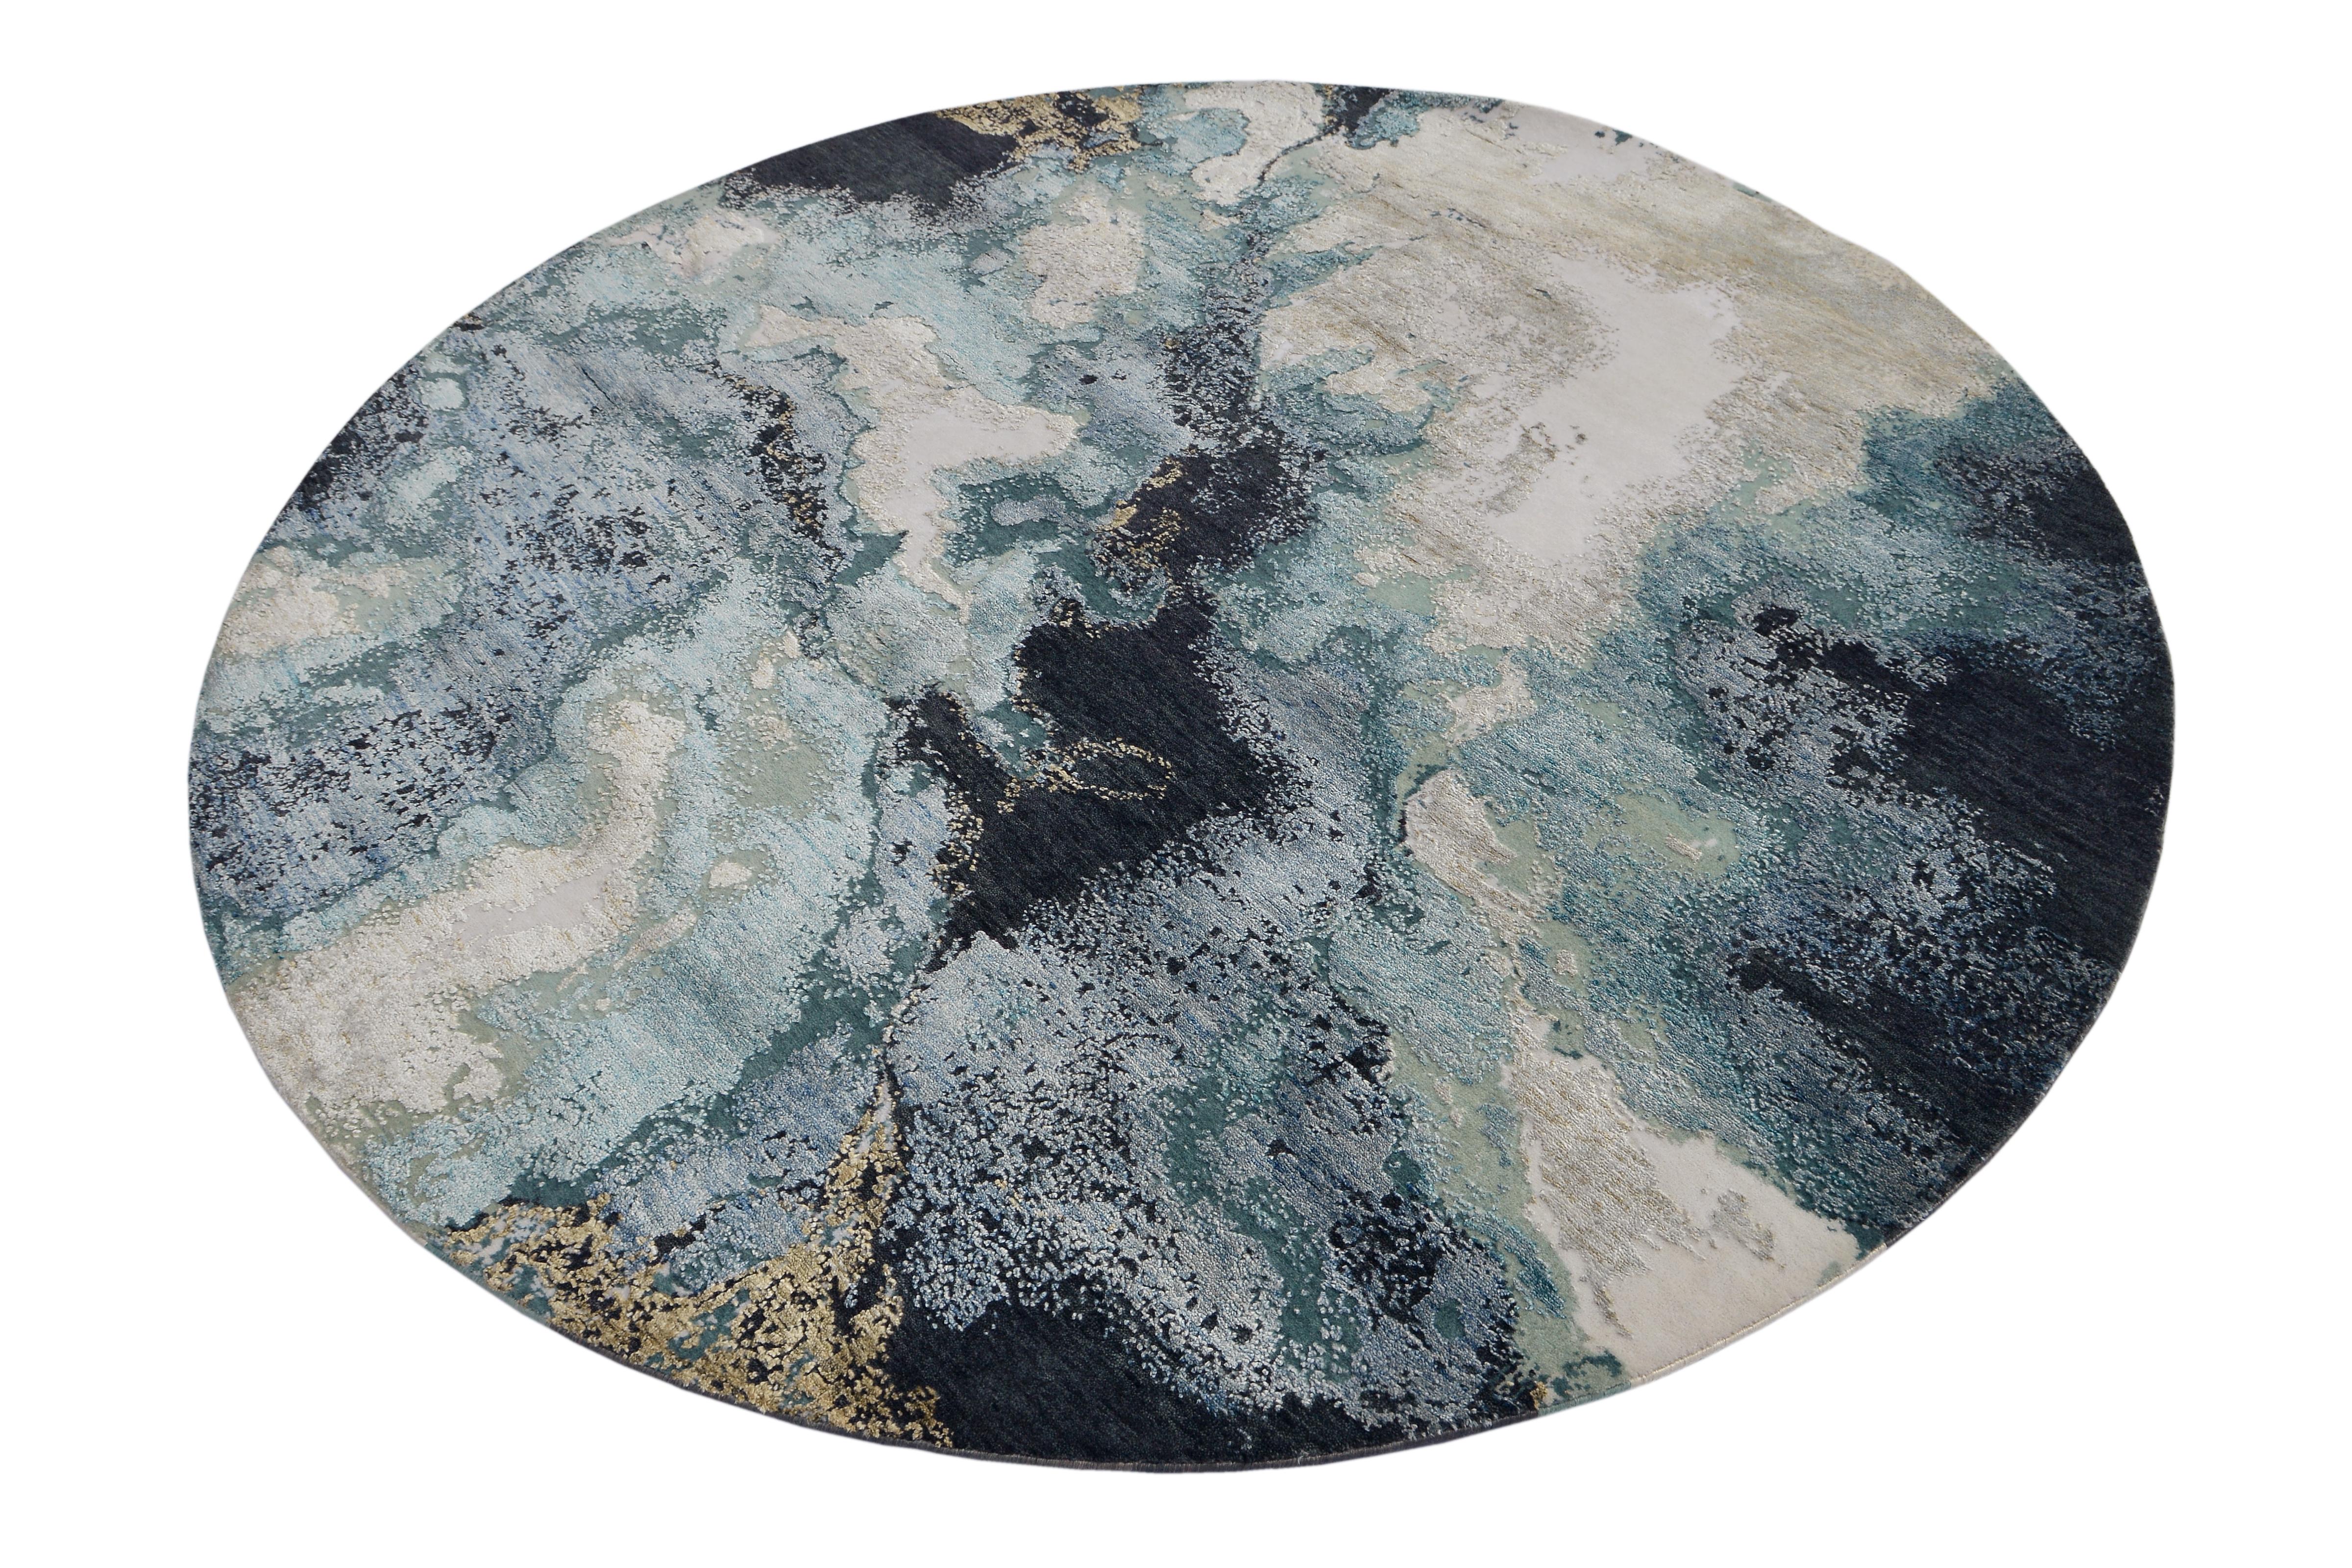 A new addition to the handmade rugs in the abstract rug line by Rug & Kilim, this 6'8” x 6'8” round modern rug is hand knotted in a unique, proprietary blend of quality wool and silk, the natural luster of the latter bringing out modern hues of